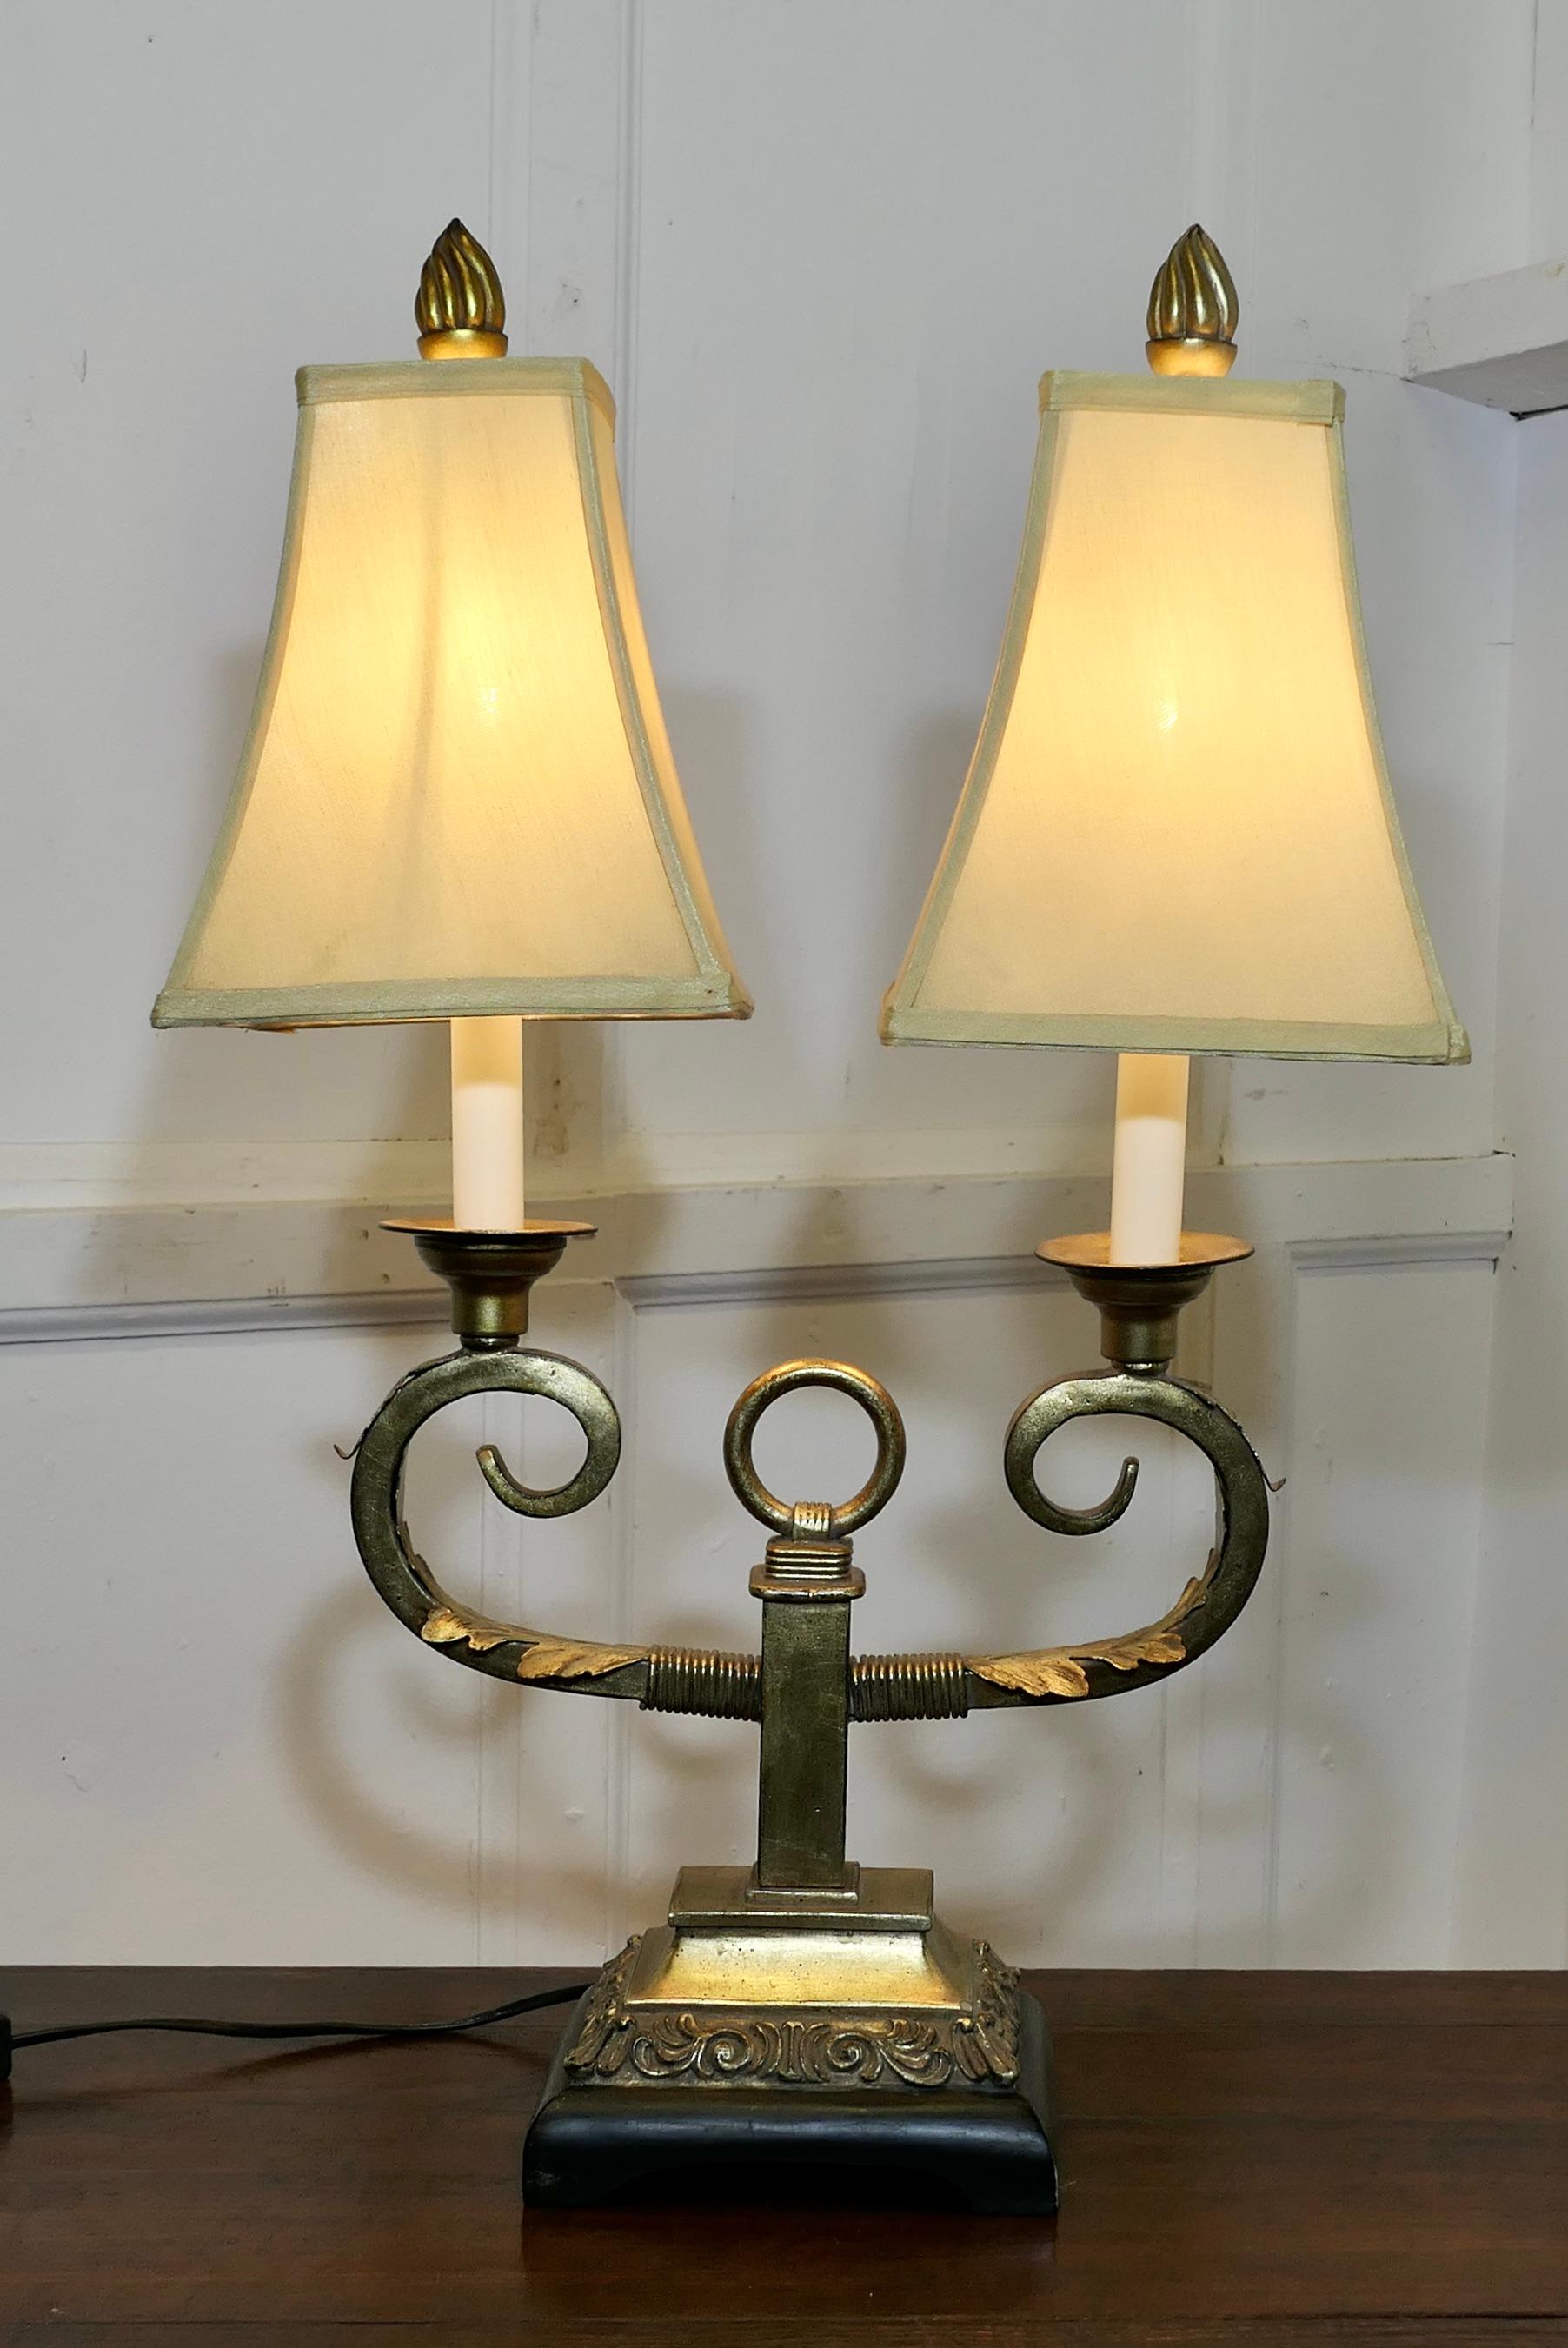 Art Deco Hollywood Regency Twin Toleware Table Lamp

This is a charming piece, it is made in brass and toleware, it has 2 large curled branches each topped with a large lampshade
All in good working condition with an age related patina

The lamp is